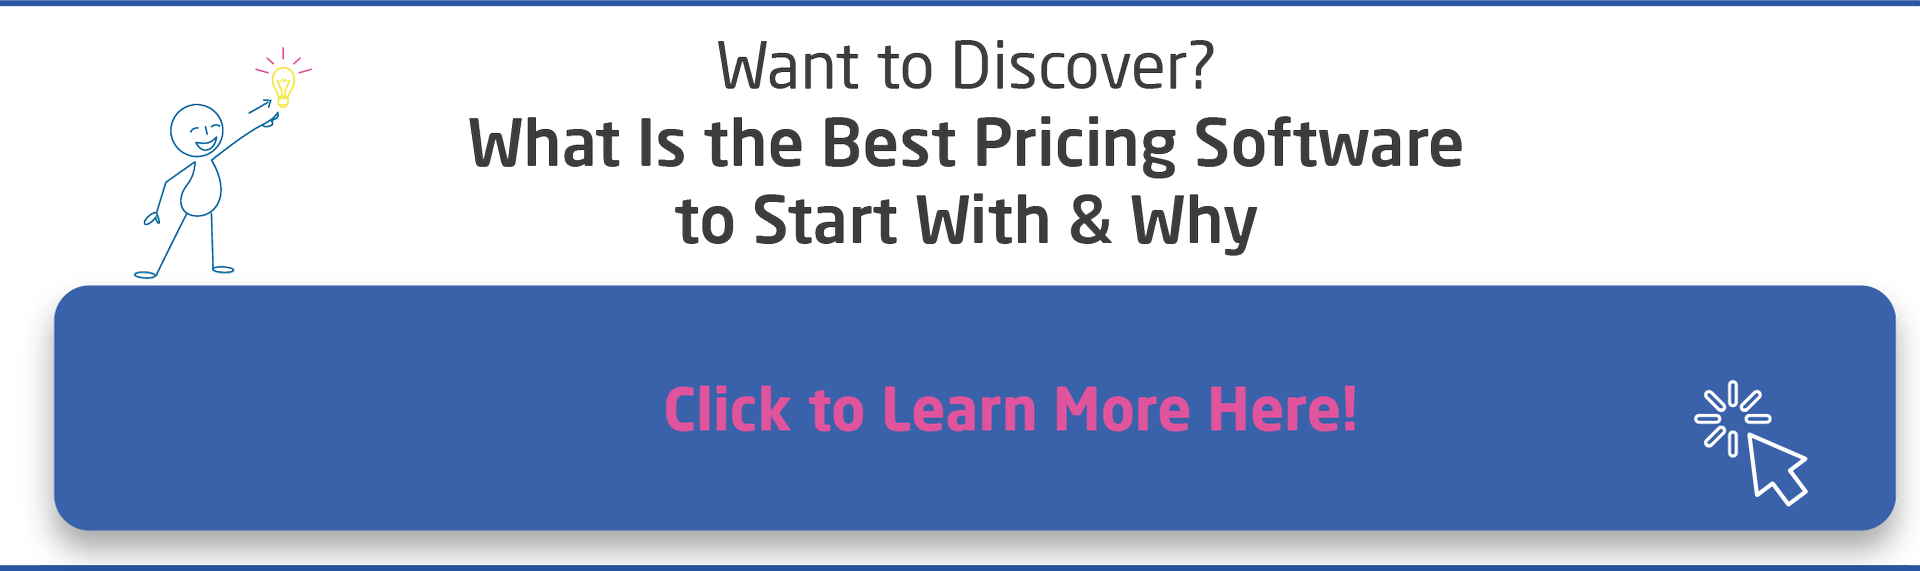 CTA-What-is-the-Best-Pricing-Software-to-Start-With-And-Why